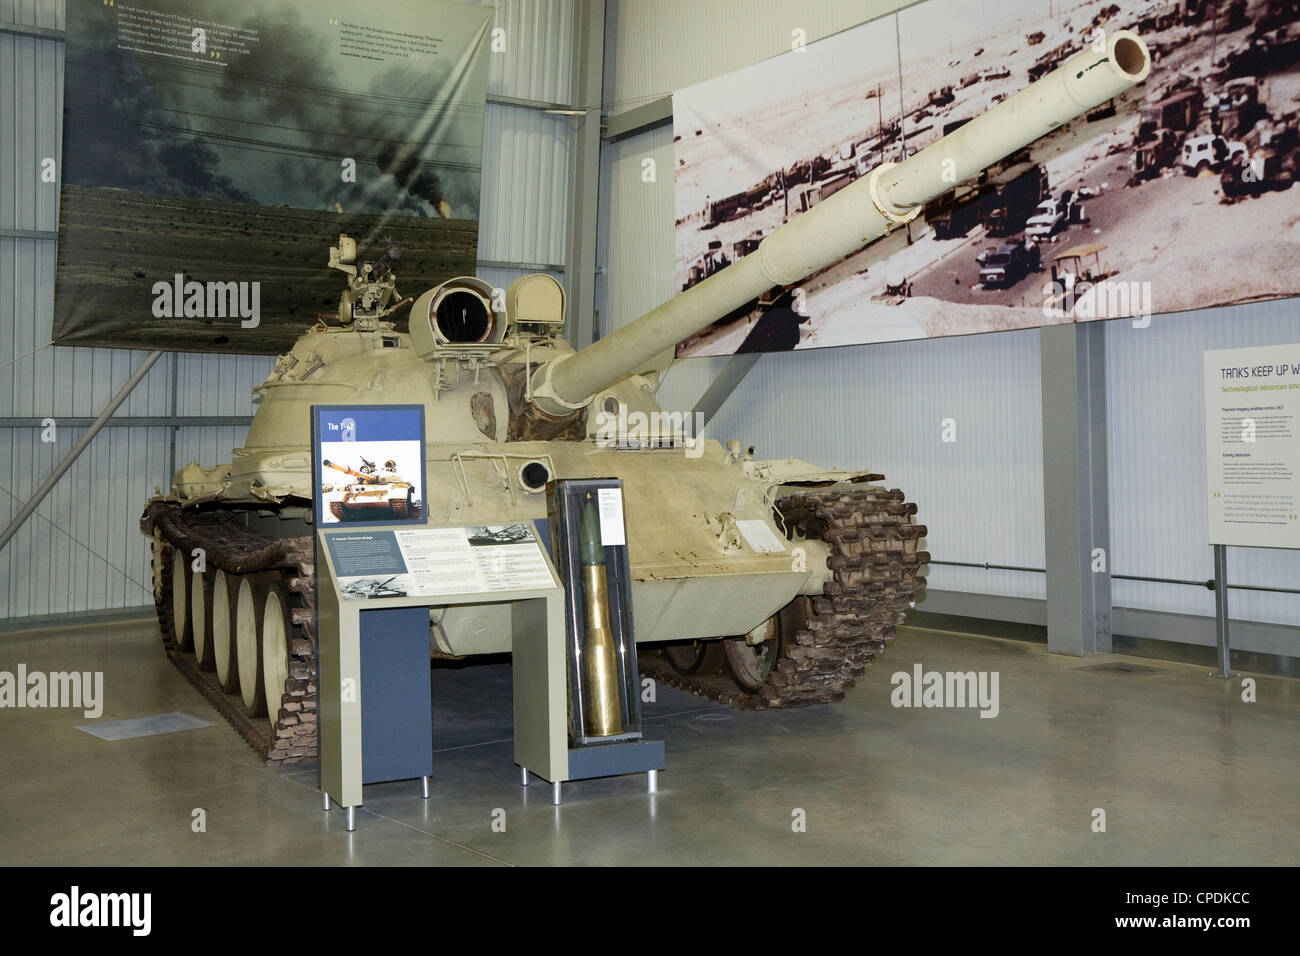 Soviet / Russian T-62 tank captured from the Iraqi army in 1991: Exhibit on display at the The Tank Museum, Bovington, Dorset UK Stock Photo